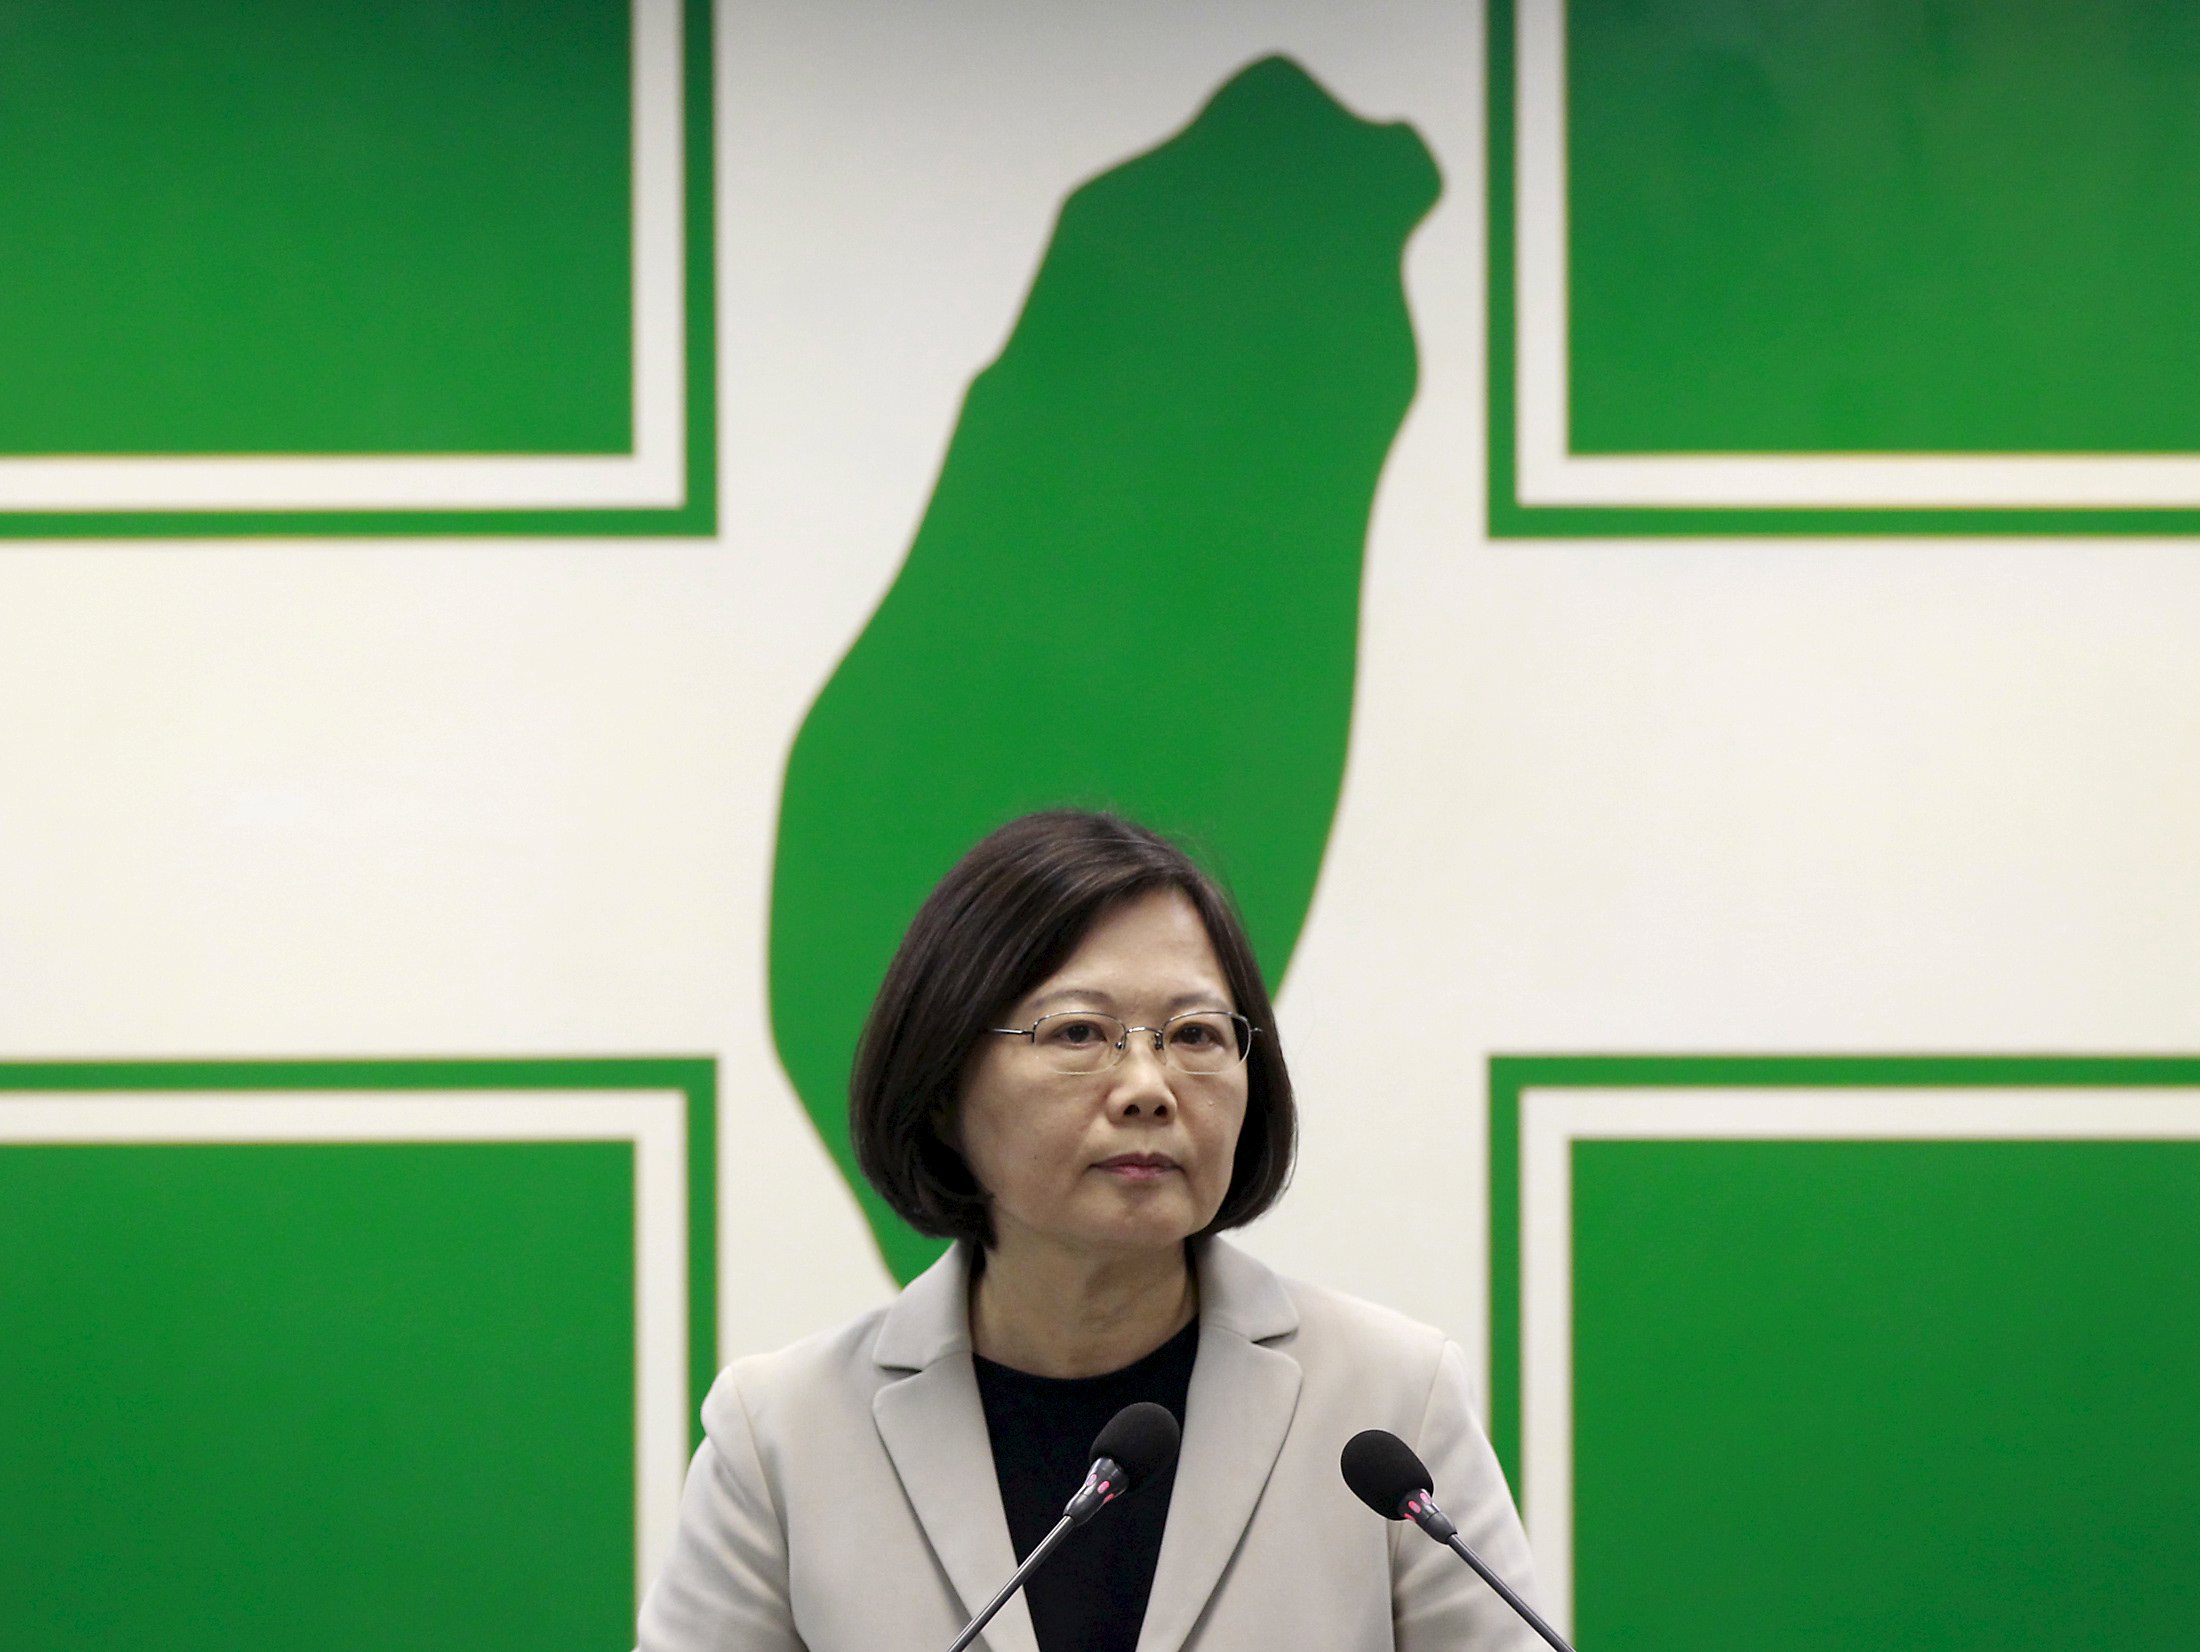 Taiwan's main opposition Democratic Progressive Party (DPP) Chairperson Tsai Ing-wen gives a speech before their central standing committee in Taipei, Taiwan, in this November 4, 2015 file photo. To match TAIWAN-CHINA/ REUTERS/Pichi Chuang/Files